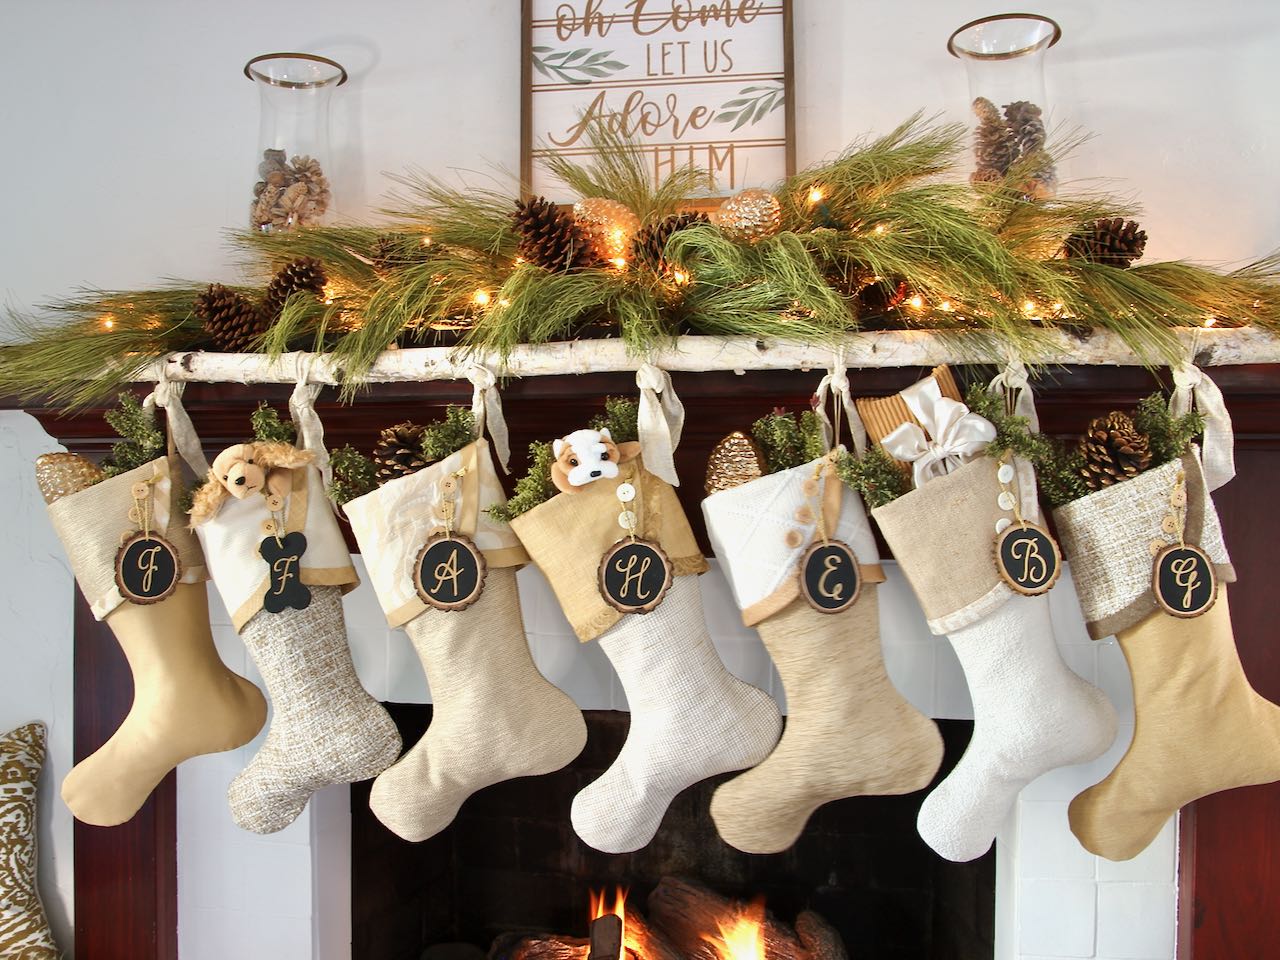 7 coordinating yet unique Christmas stockings hang from a birch branch on a mantel. Tree slice name tags hang from the cuffs' buttons